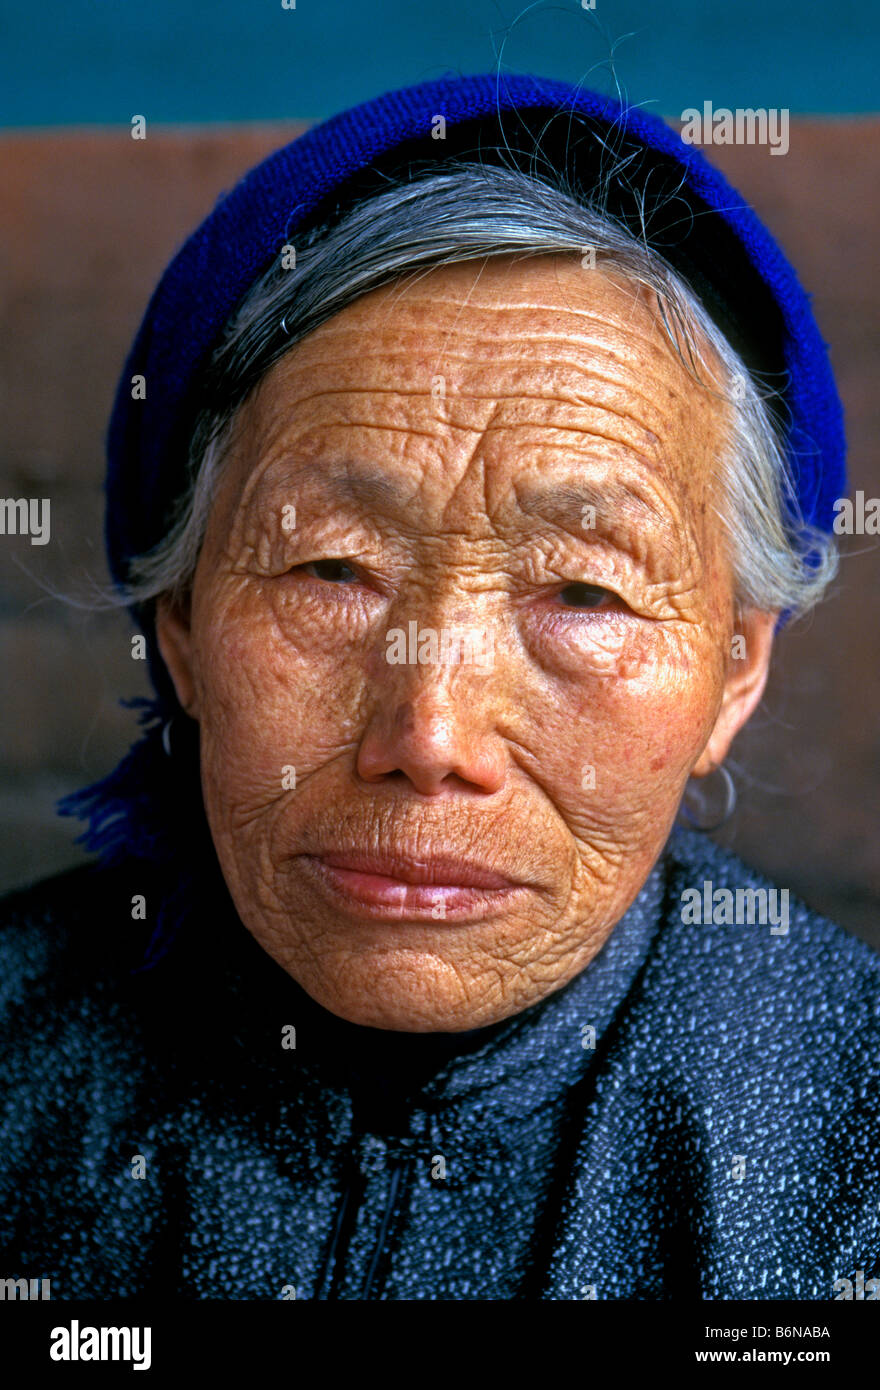 1, one, Chinese woman, old woman, elderly woman, mature woman